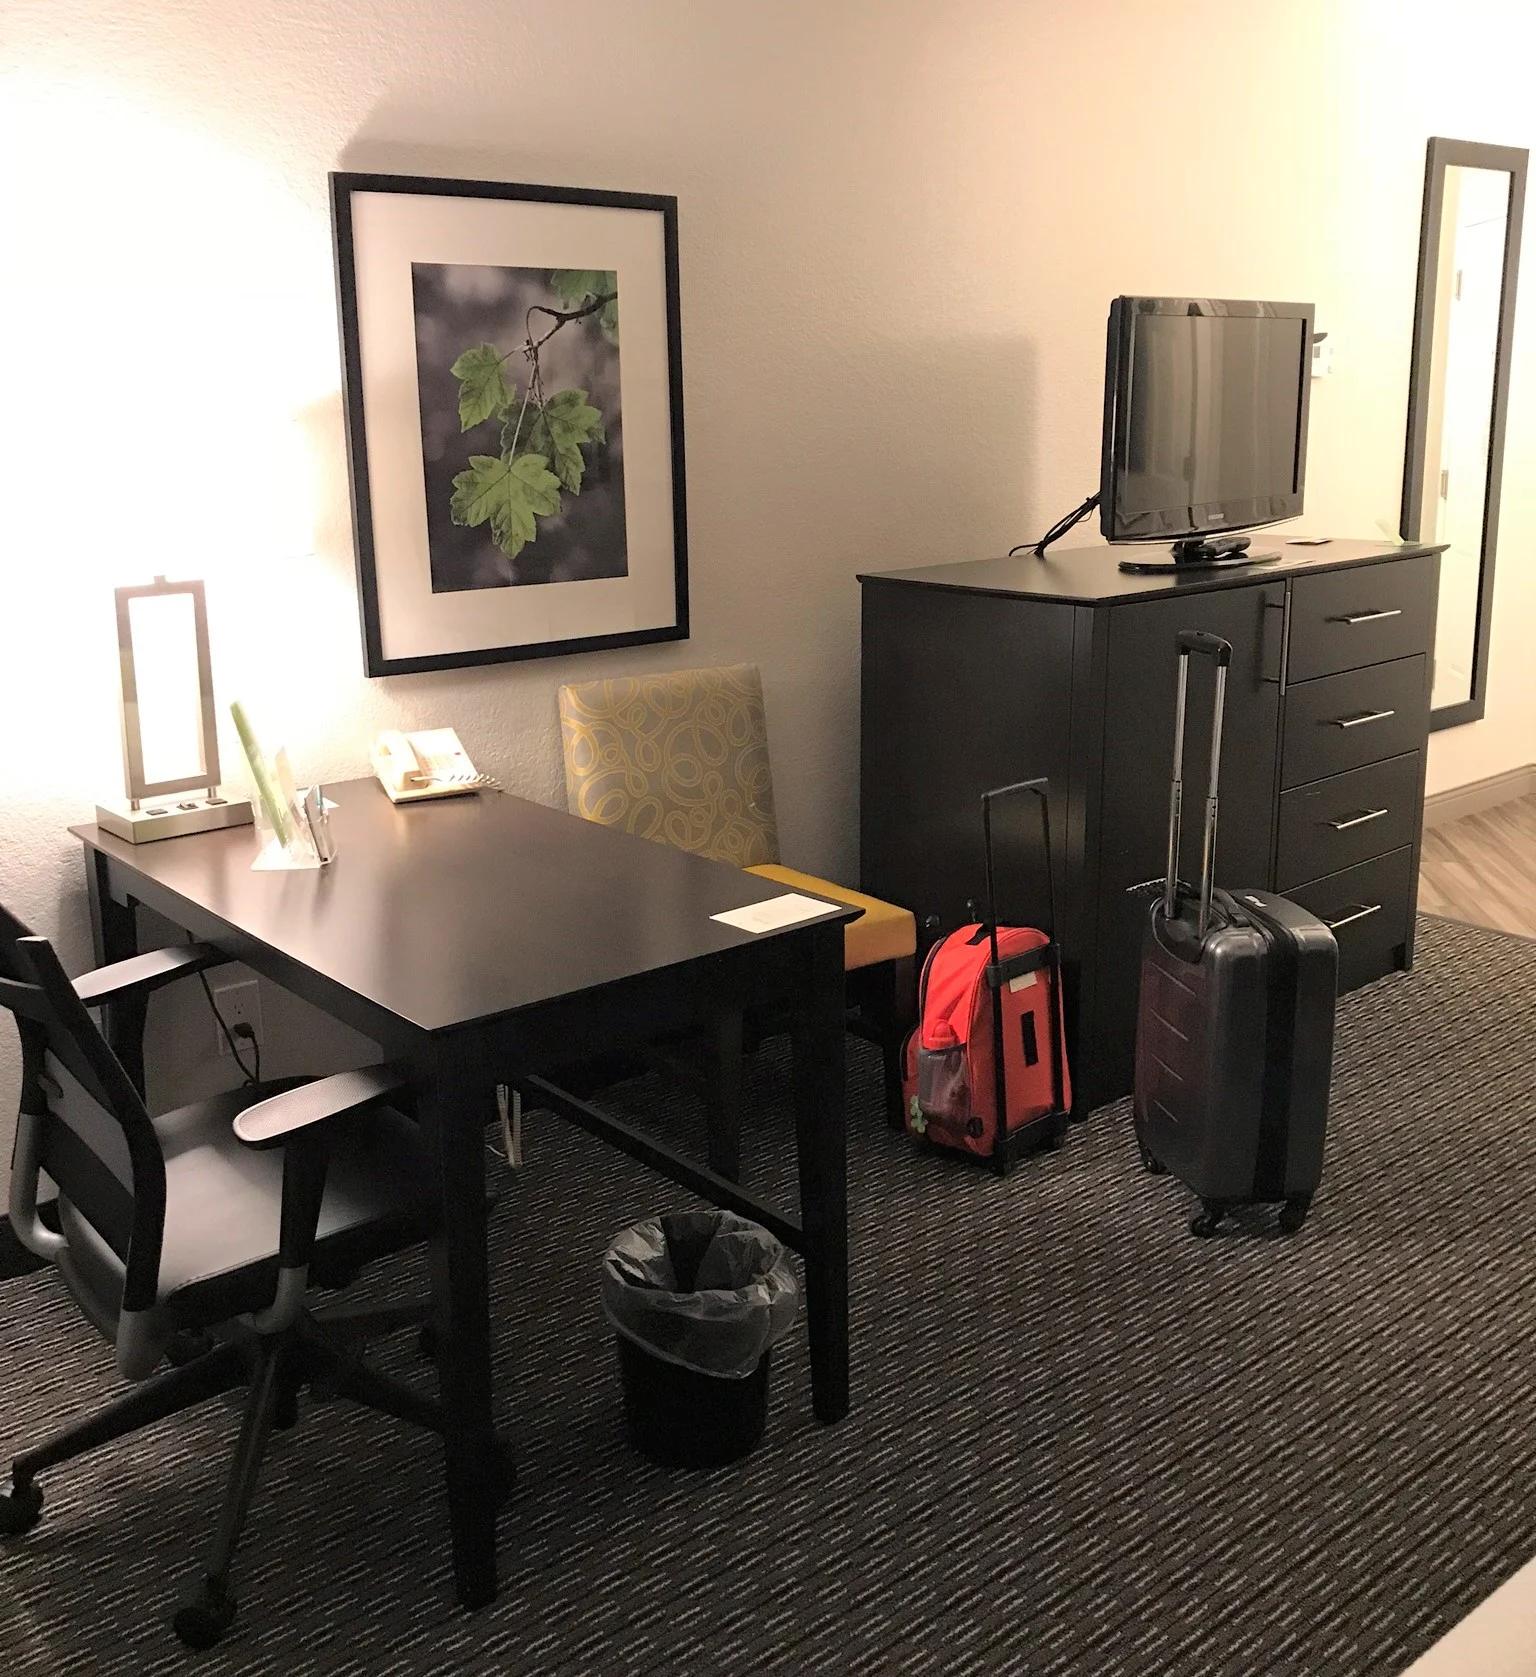 television and desk area in the hotel room